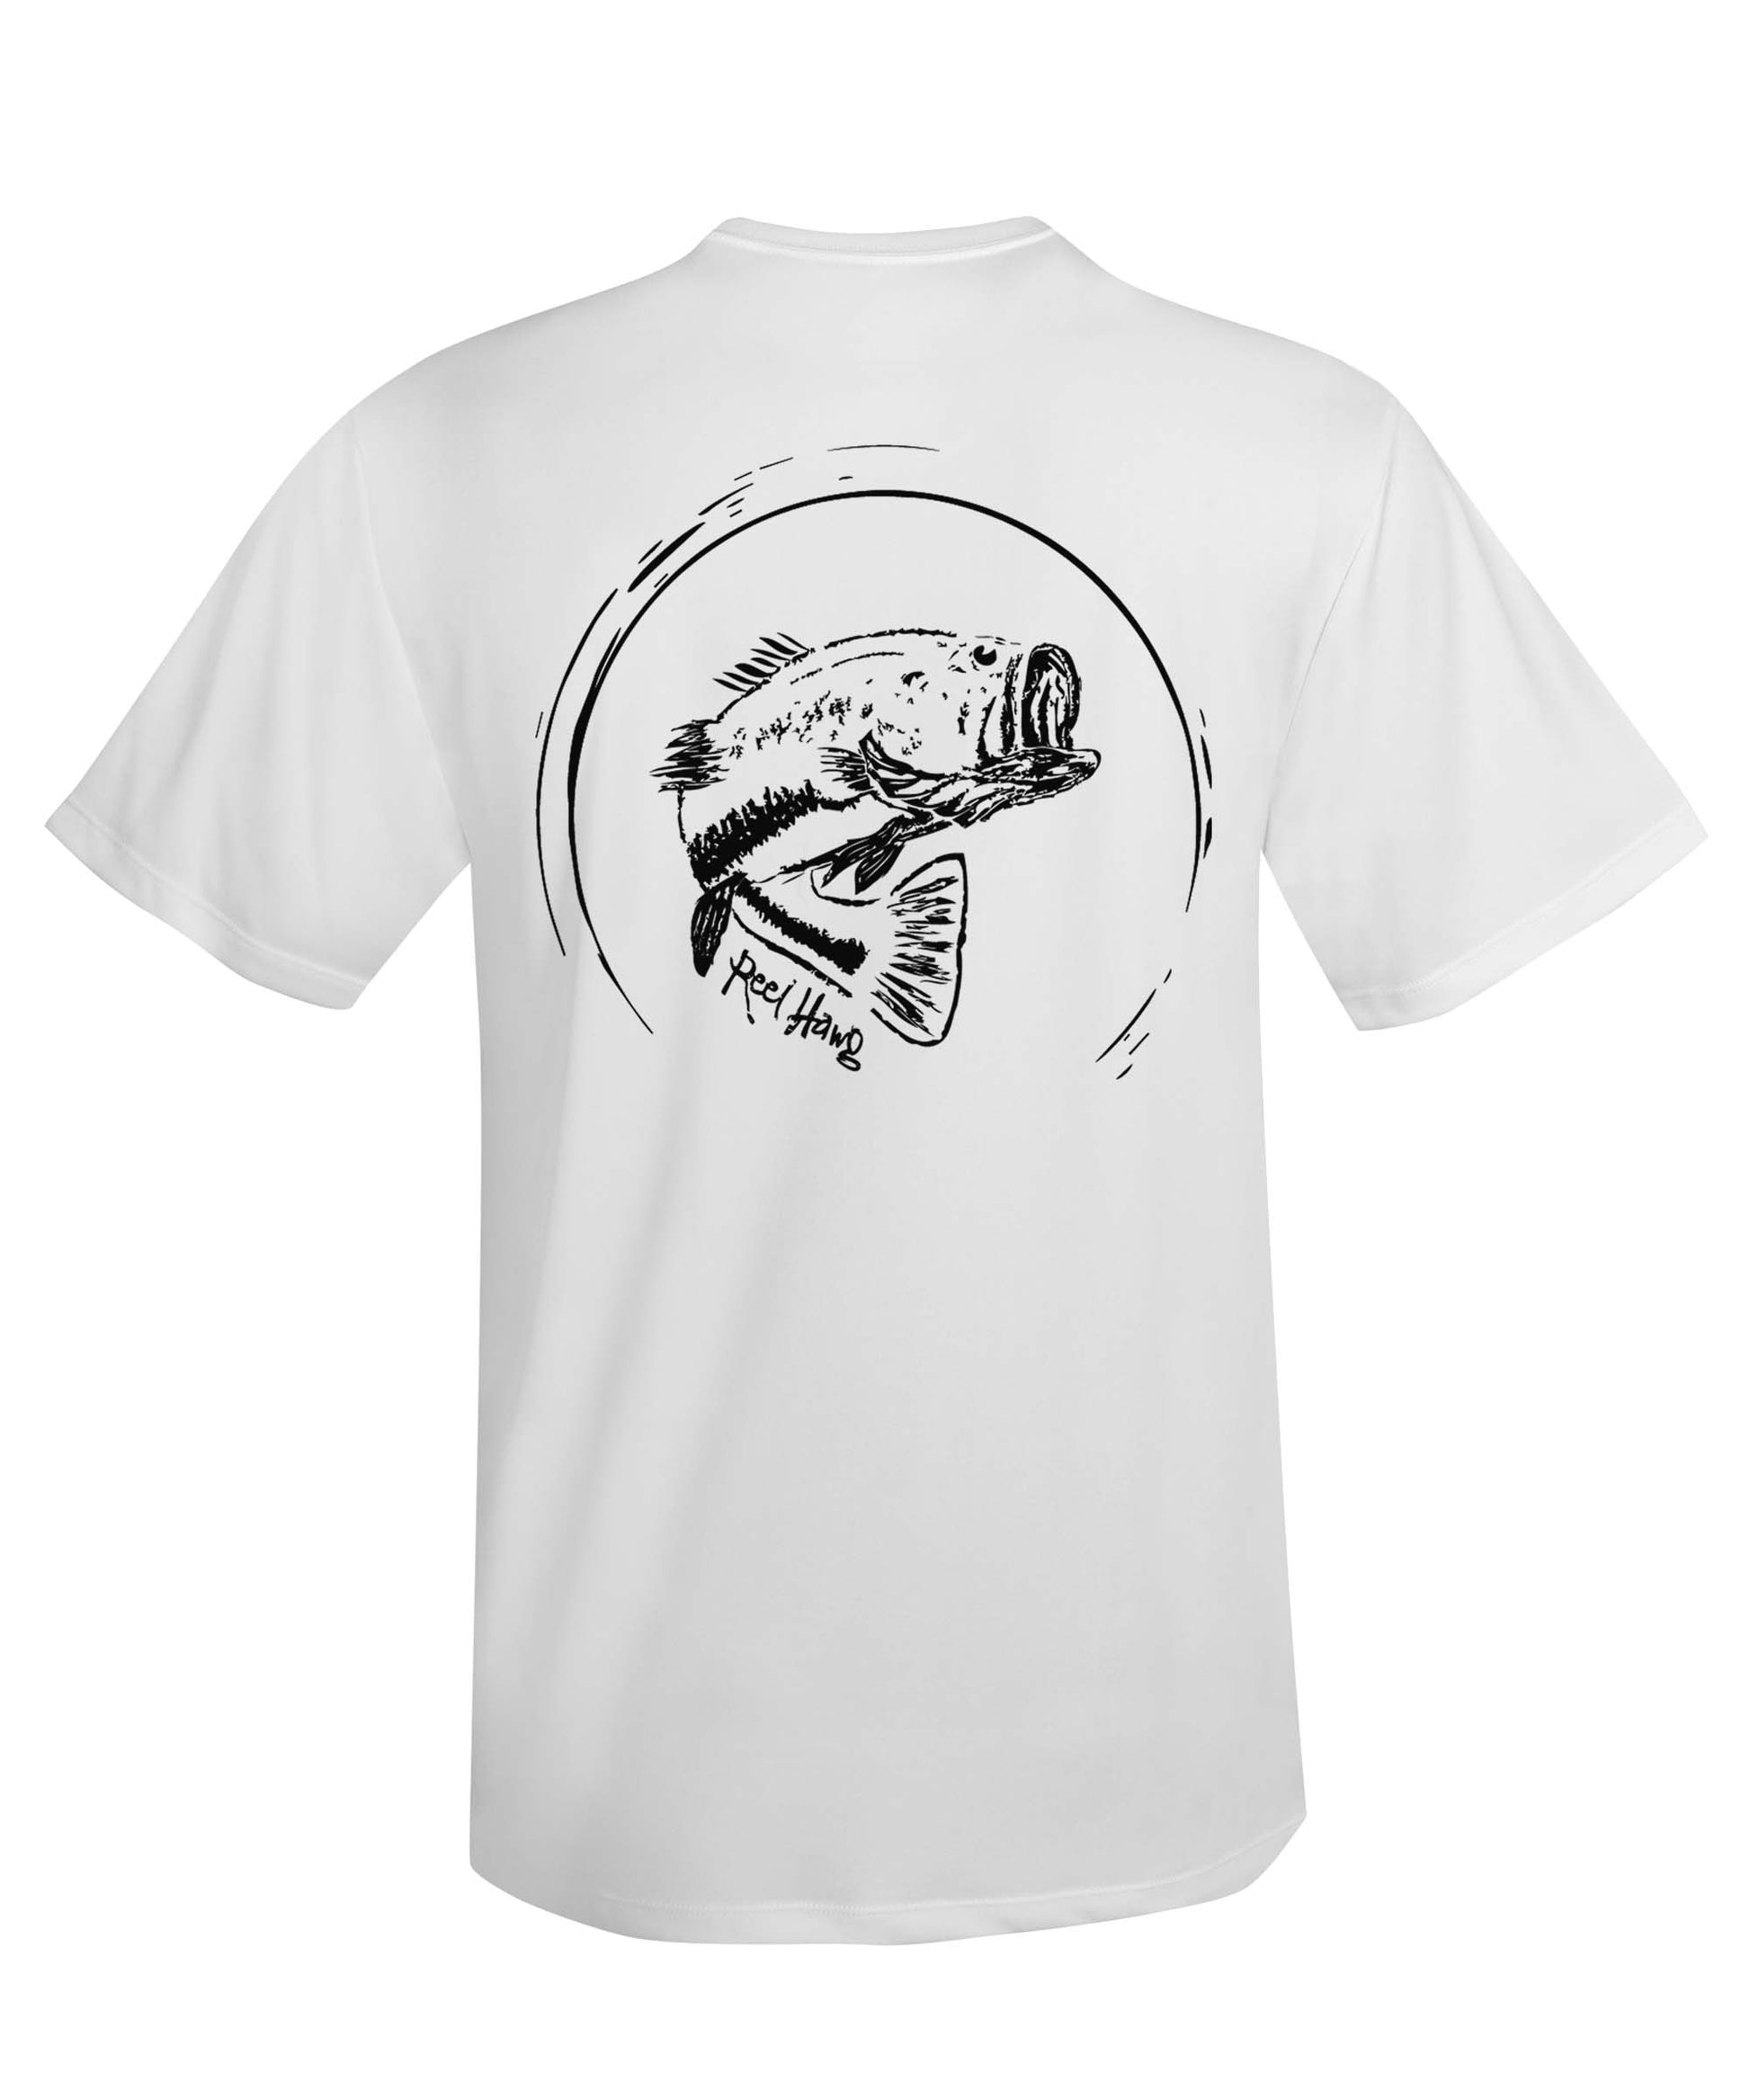 Bass fishing "Reel Hawg" white performance short sleeve shirt with 50+ UV sun protection by Reel Fishy